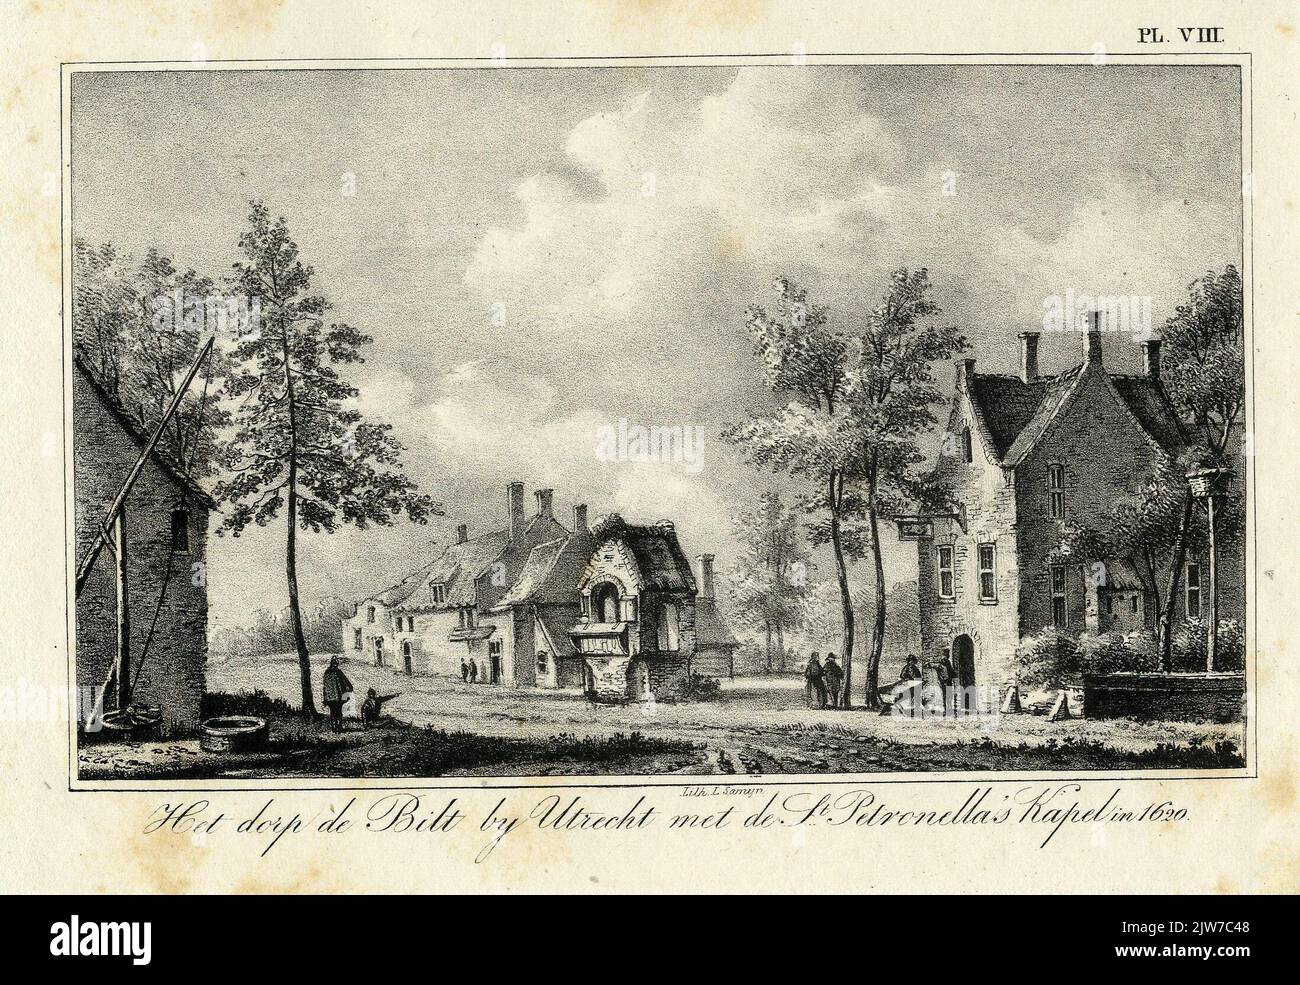 The village of De Bilt by Utrecht with the St. Petronella's chapel in 1620. Stock Photo